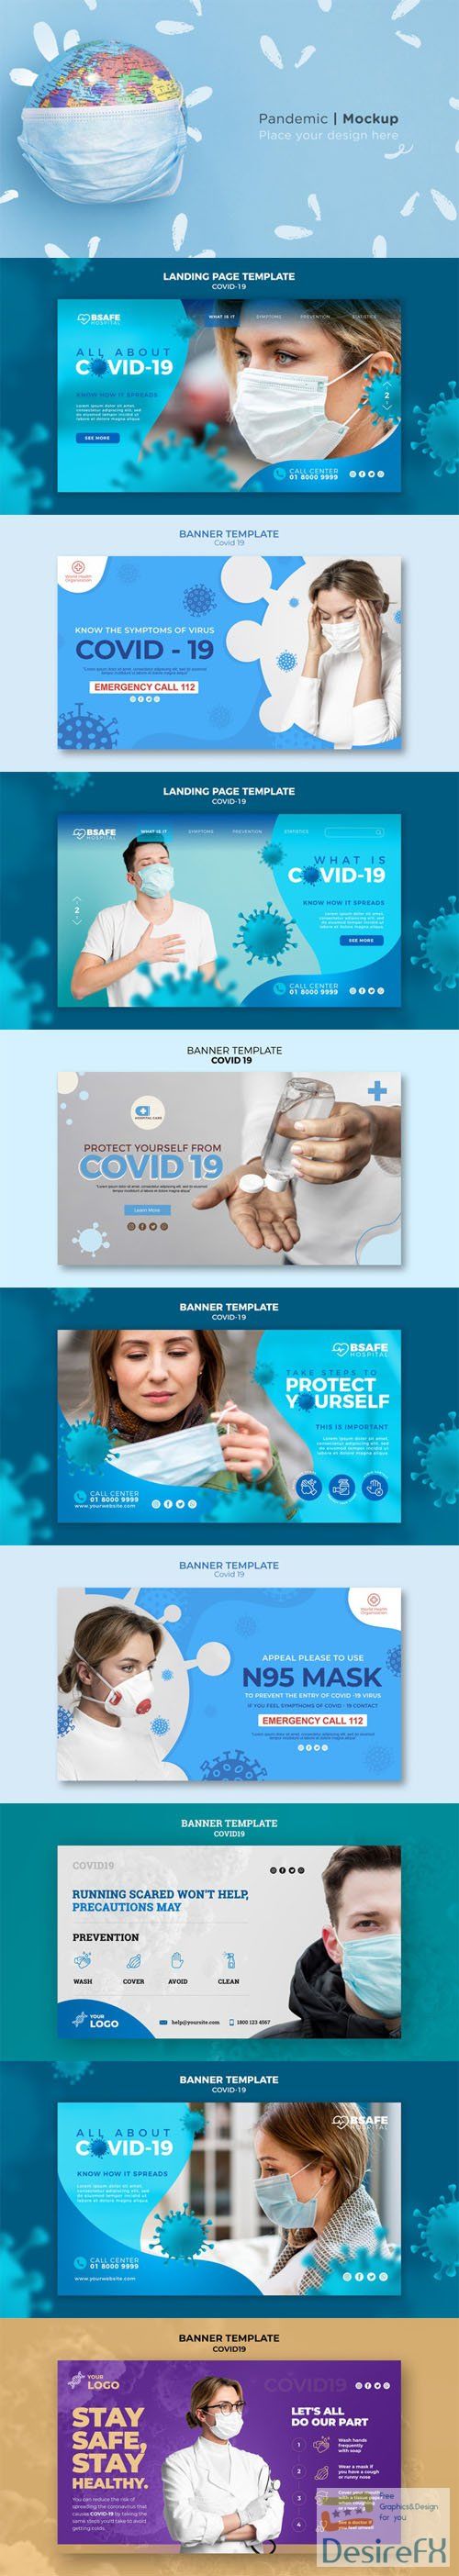 10 Covid-19 Concept Banners PSD Templates